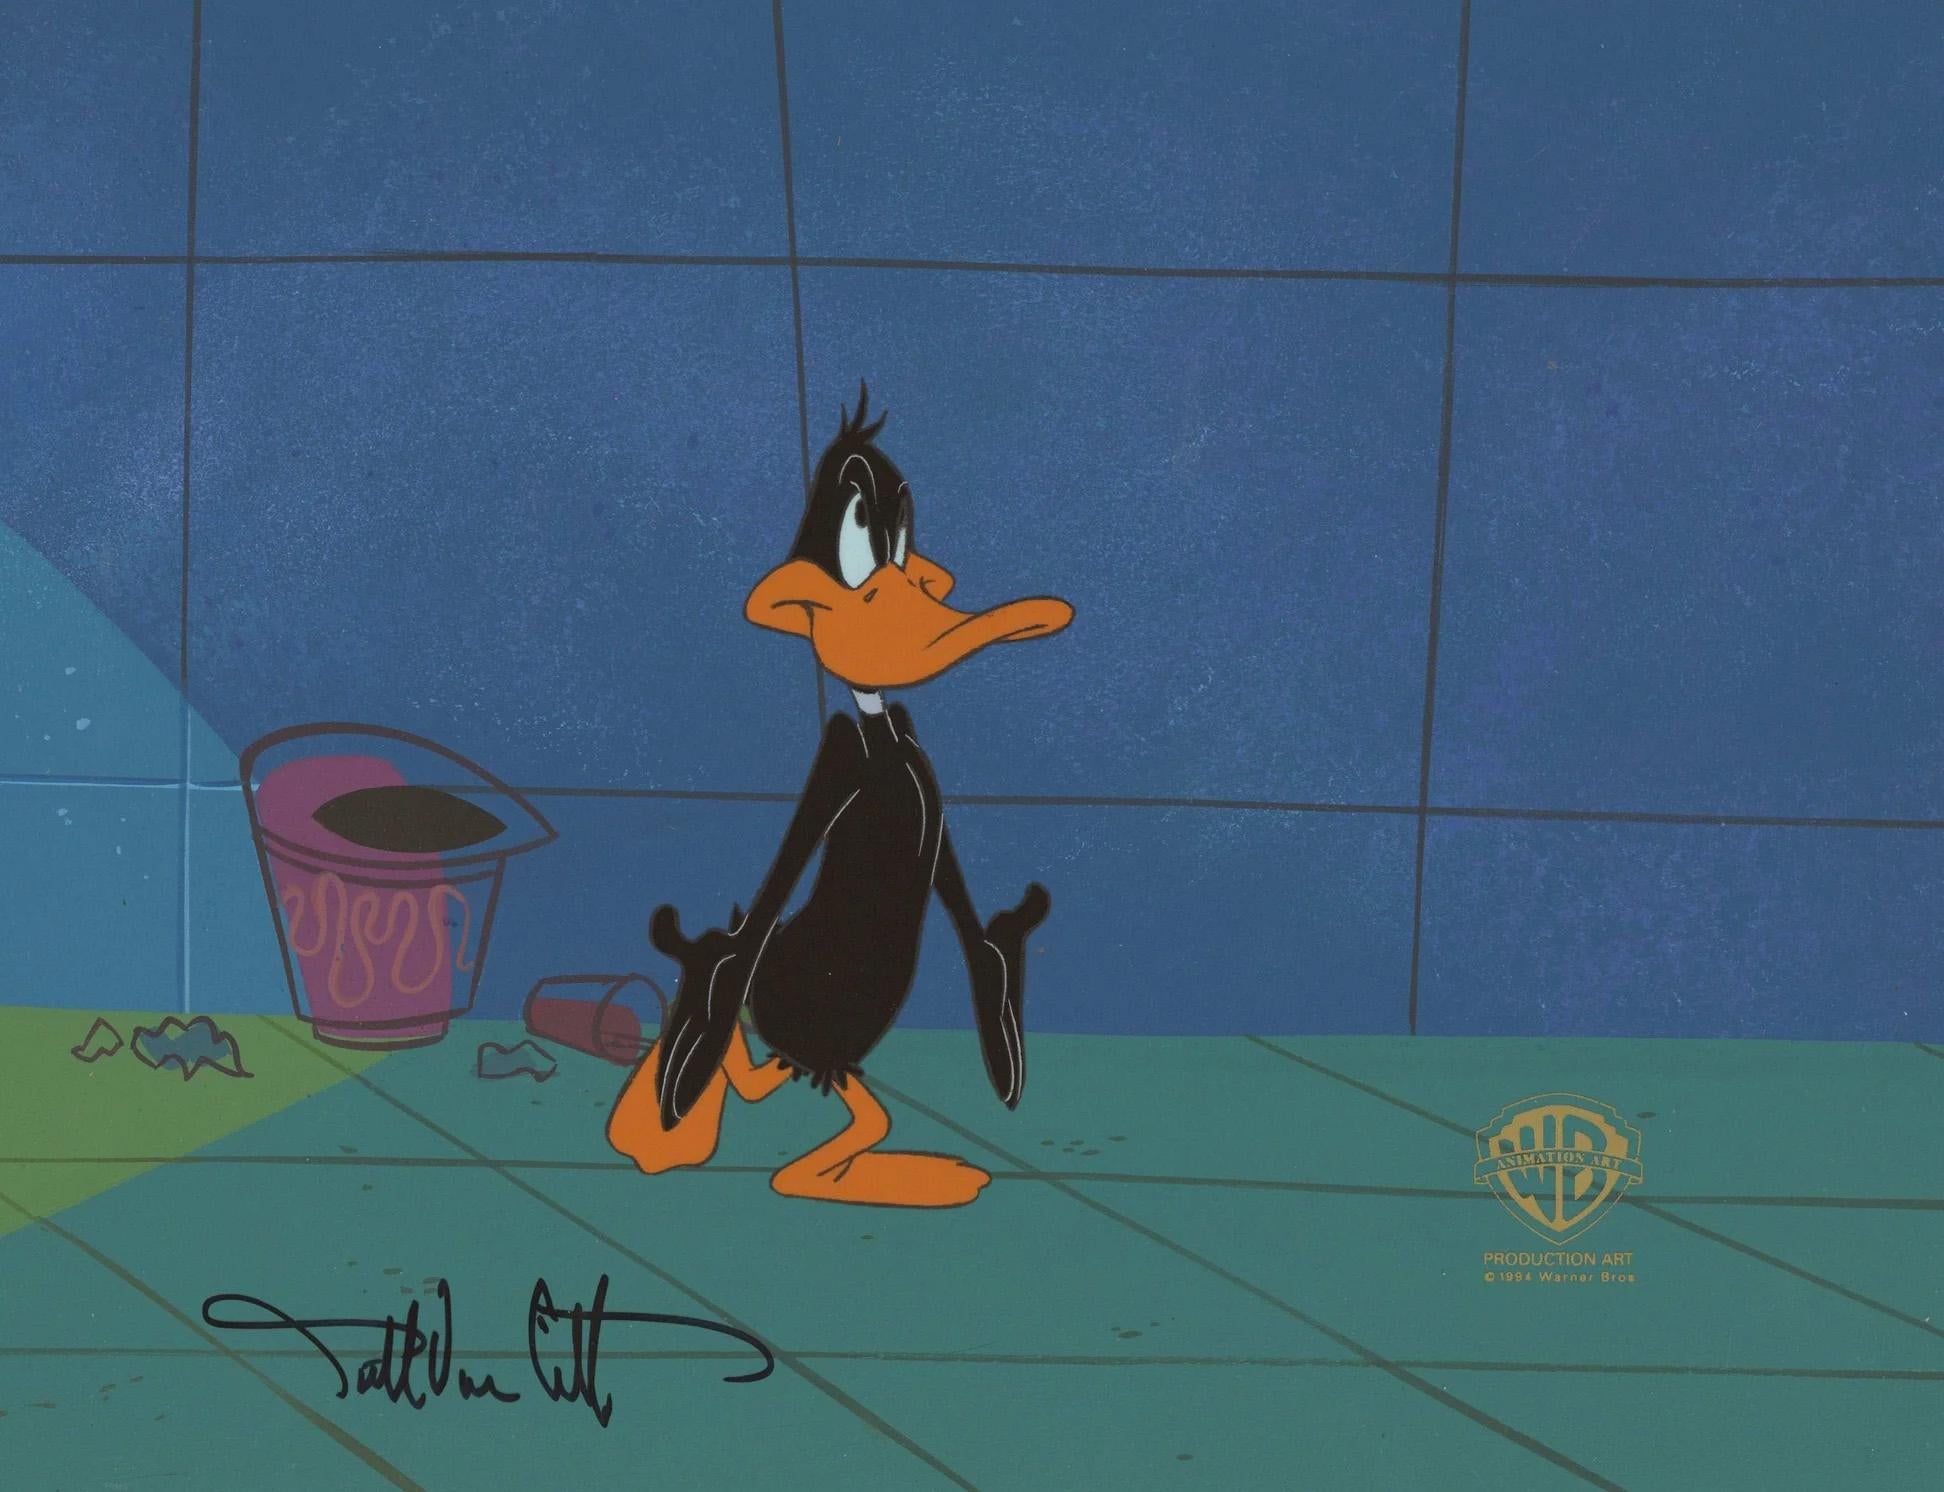 Looney Tunes Original Production Cel: Daffy signed by Darrell Van Citters - Art by Looney Tunes Studio Artists